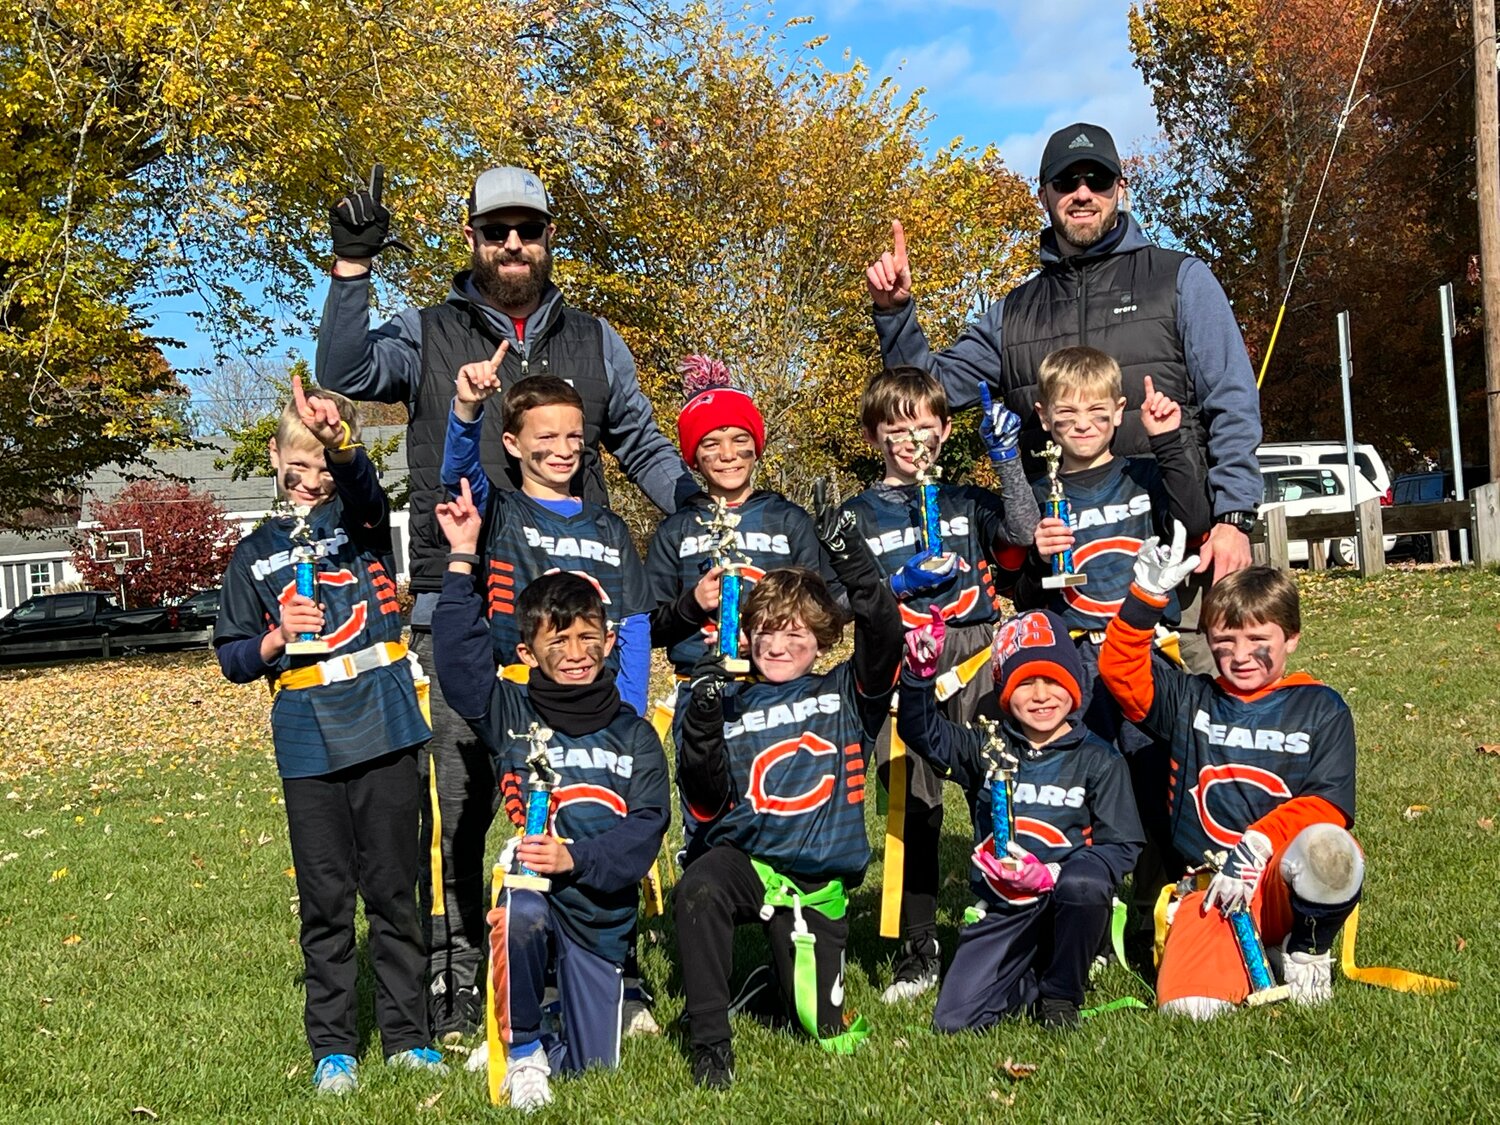 The Bears finished the season undefeated and won the 8U Division Championship.